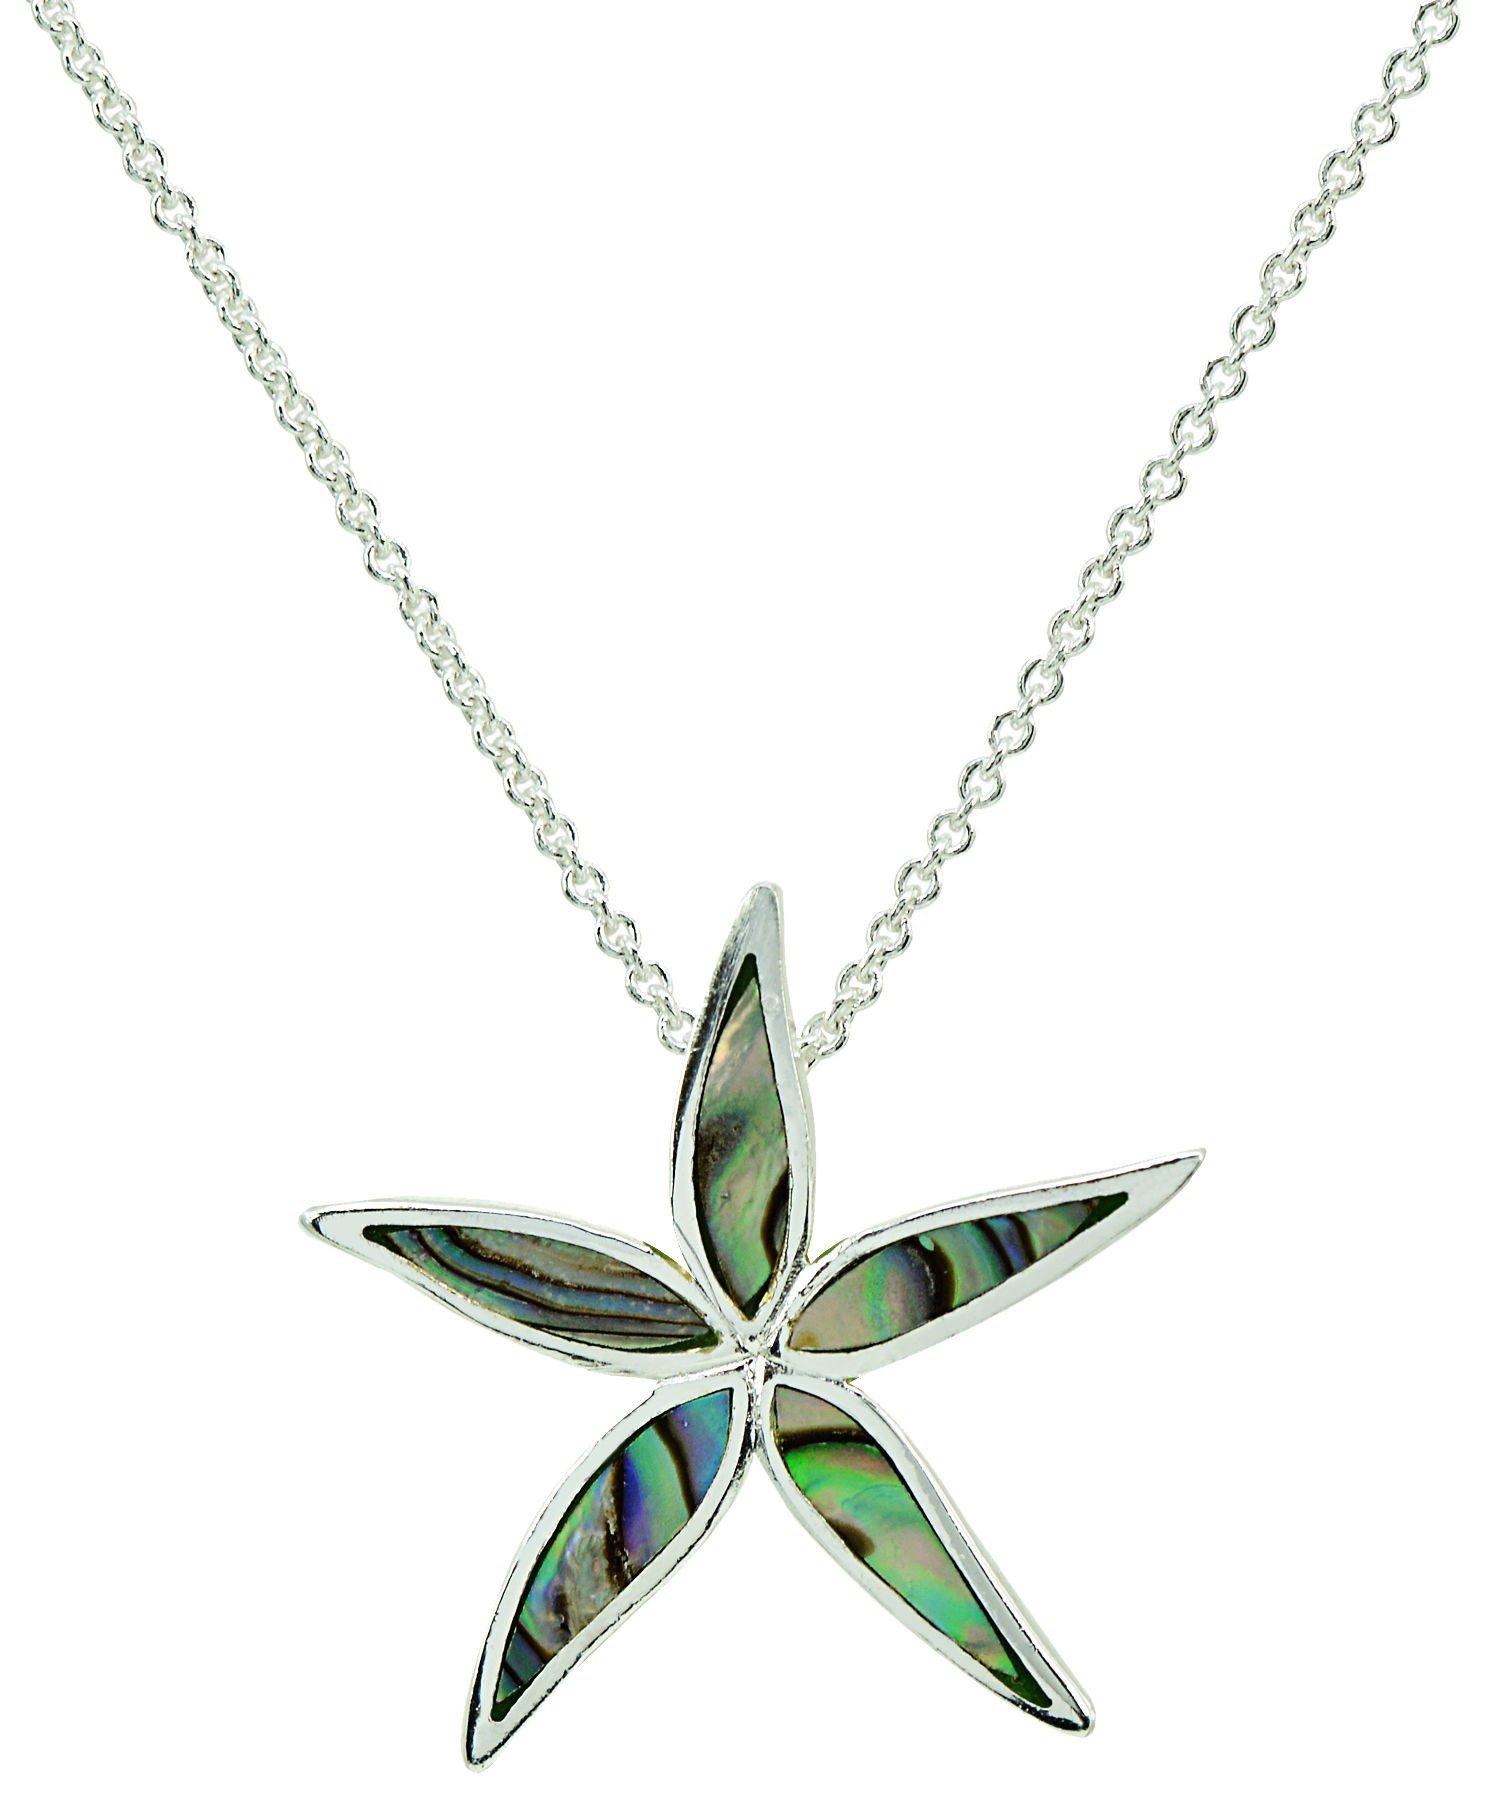 Silver Plated Abalone Starfish Pendant Necklace